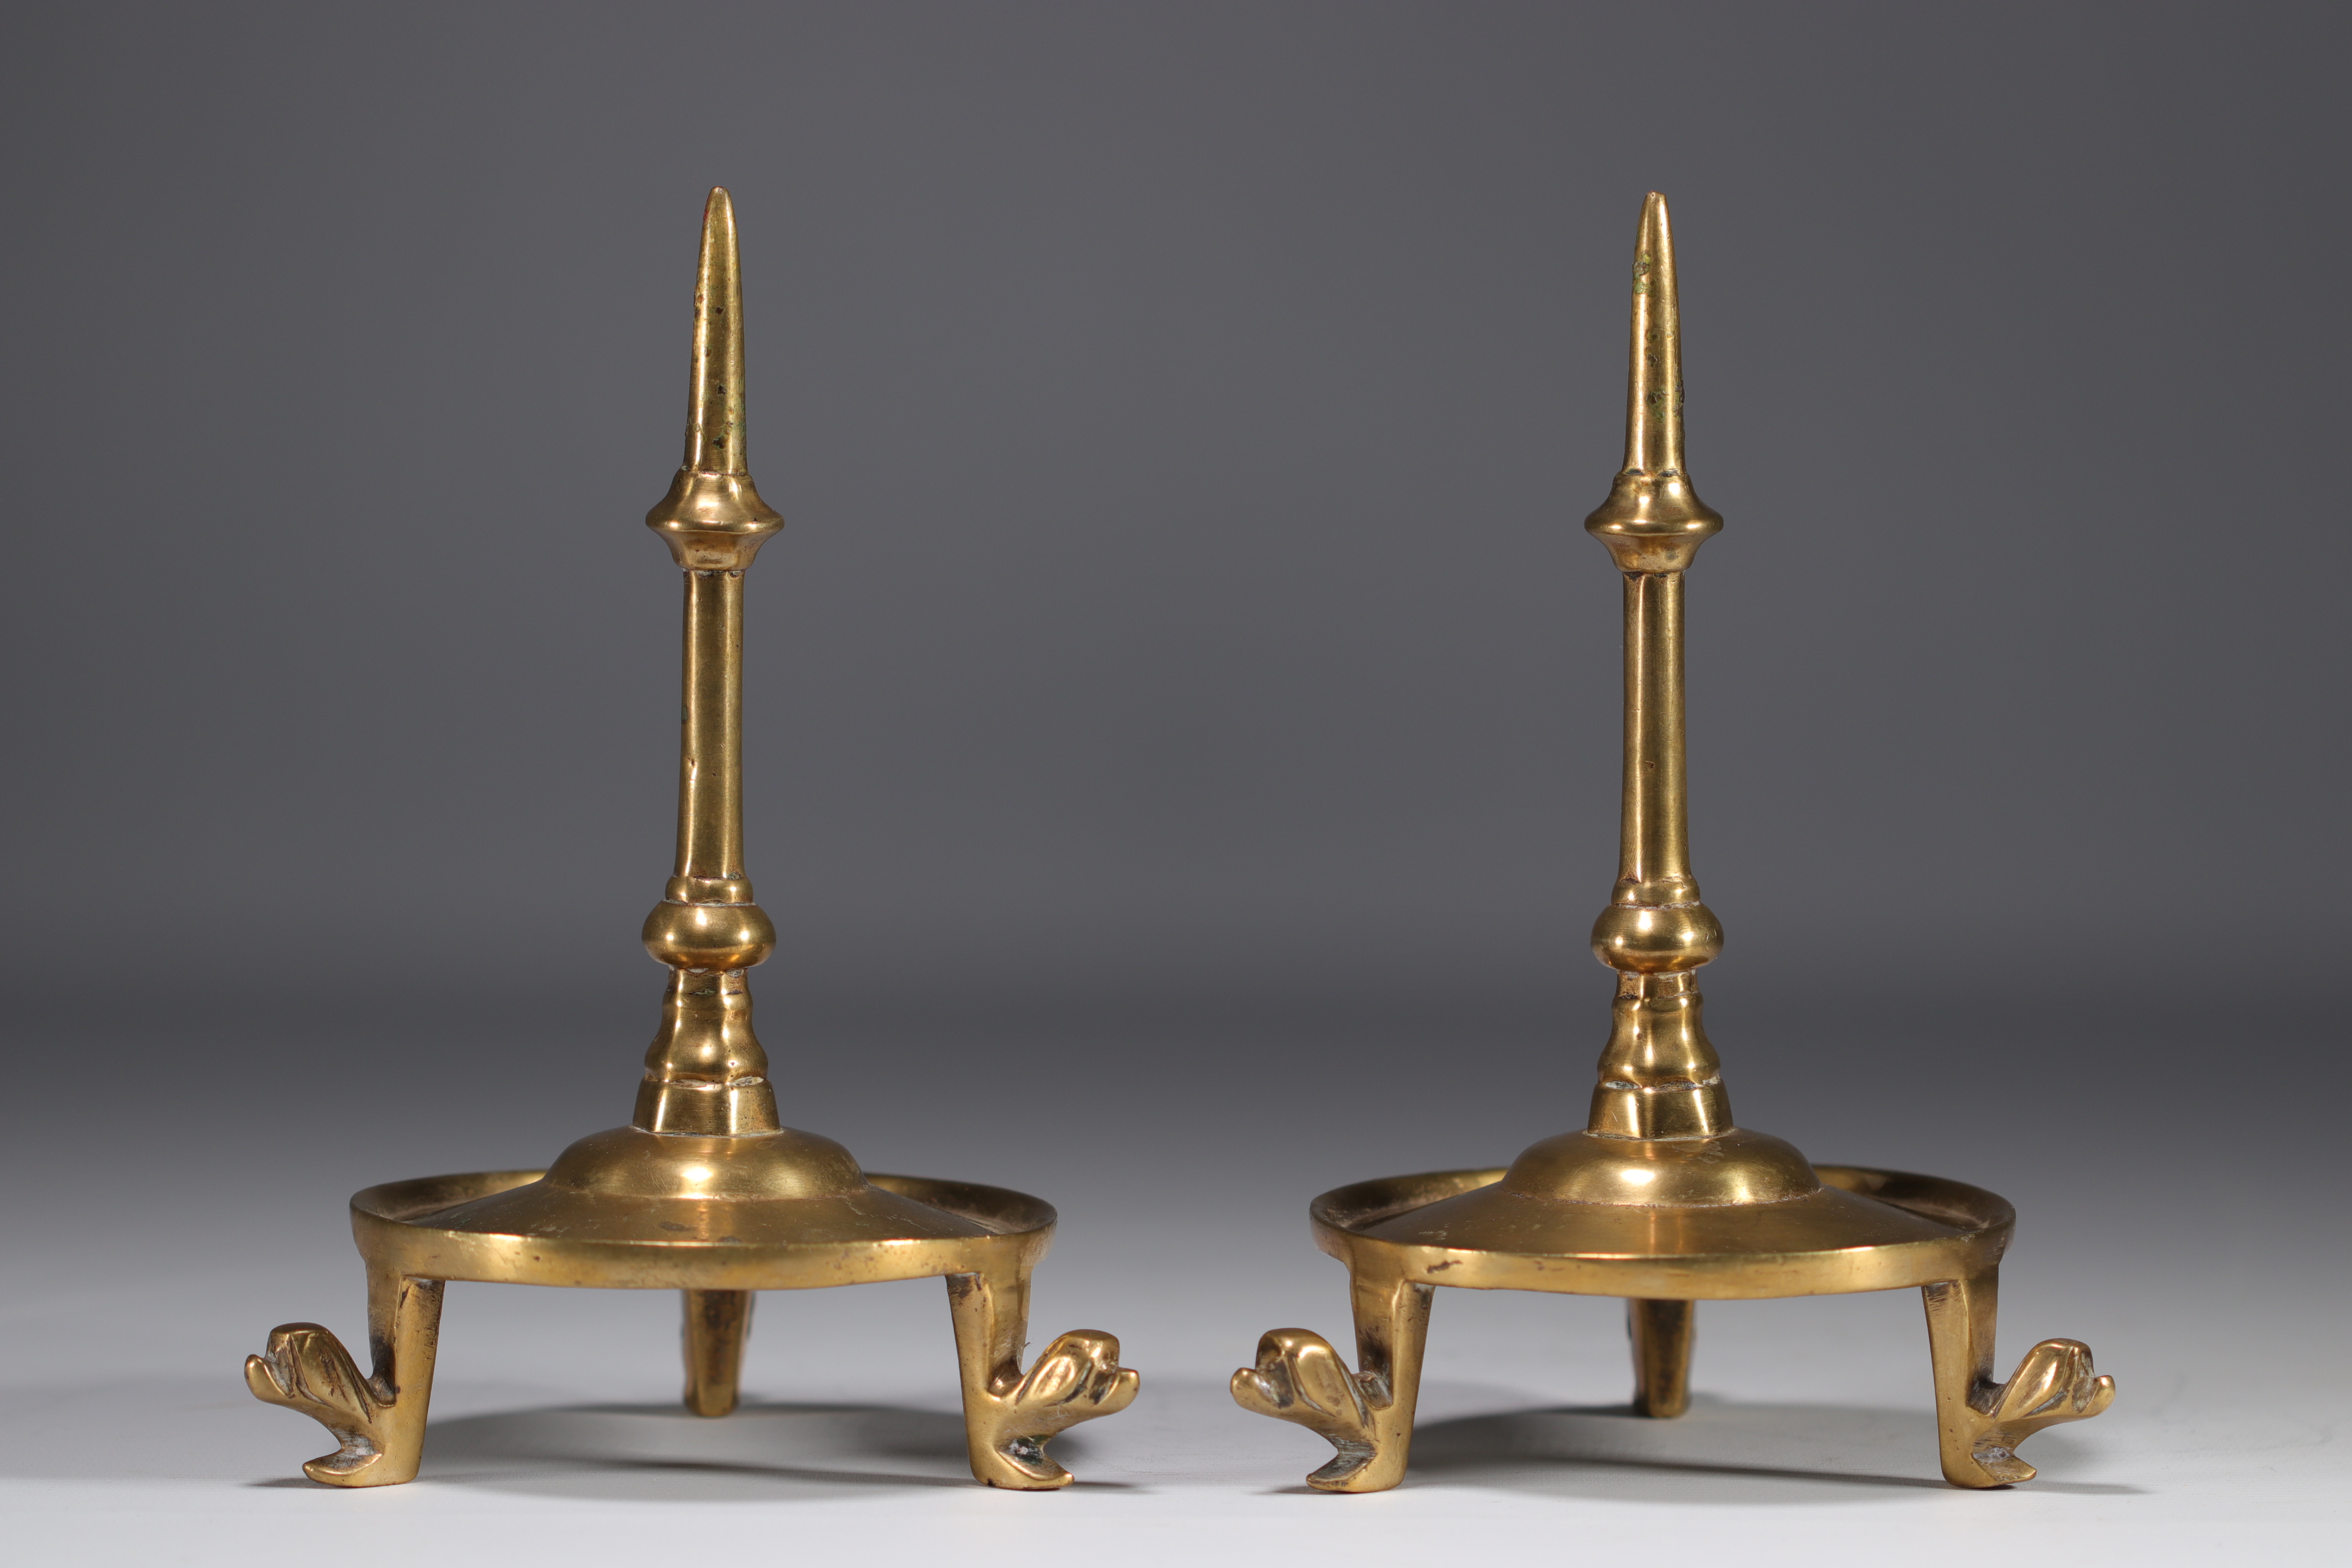 (2) Candleholders with a central bronze spike - haut epoque models